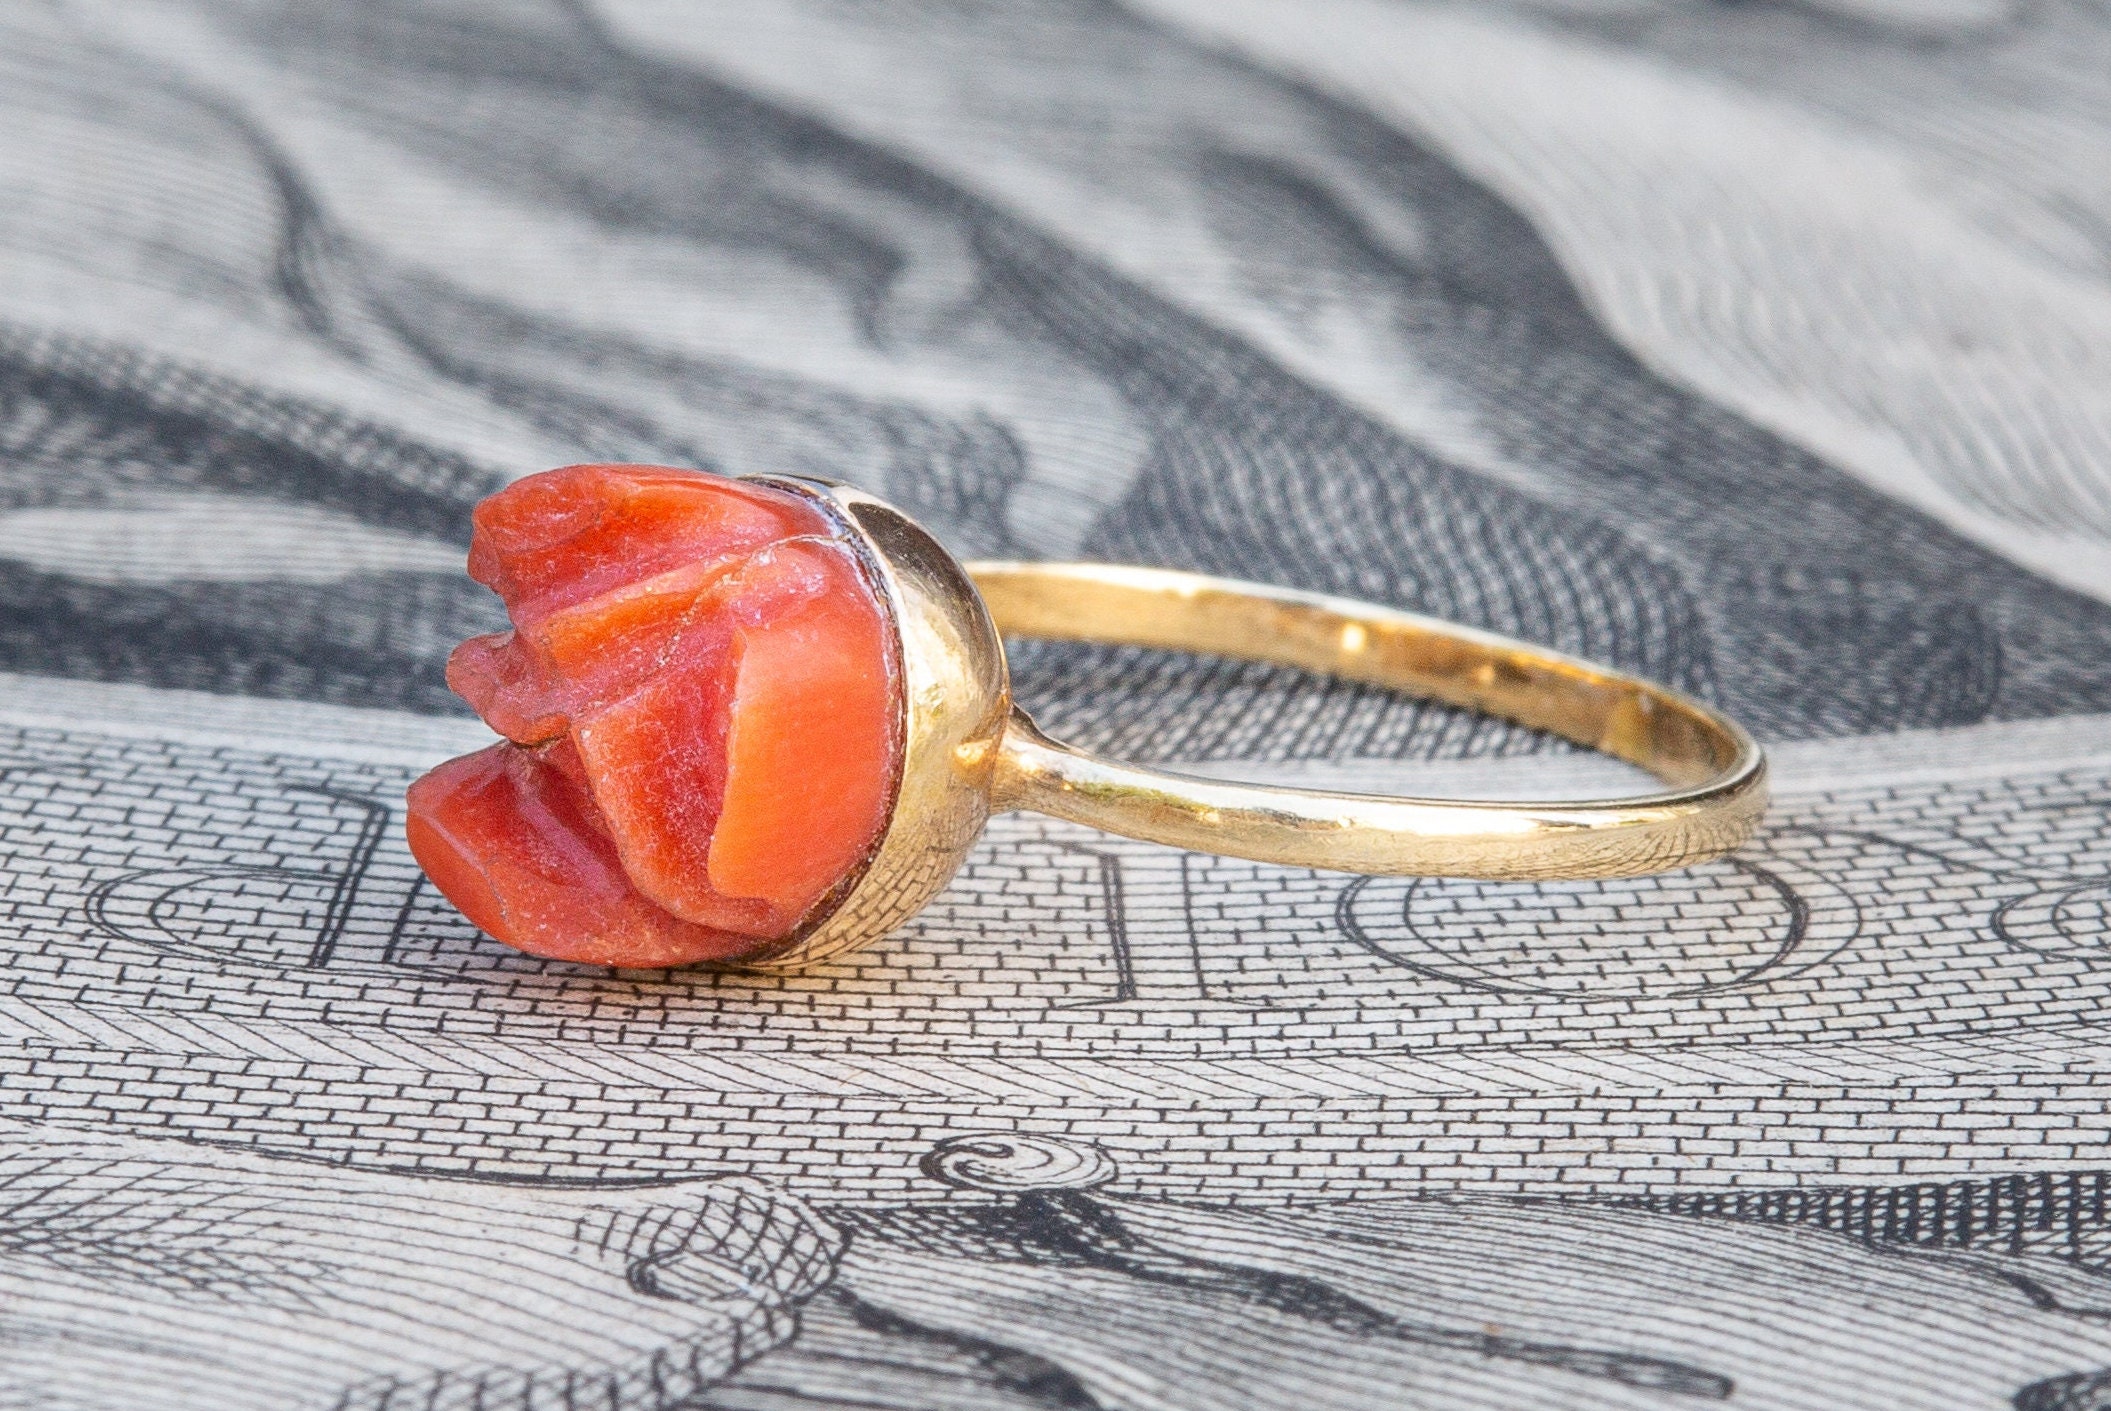 Oval Coral Ring Sterling Silver Hand Forged By Omer 24 k Gold Plated H